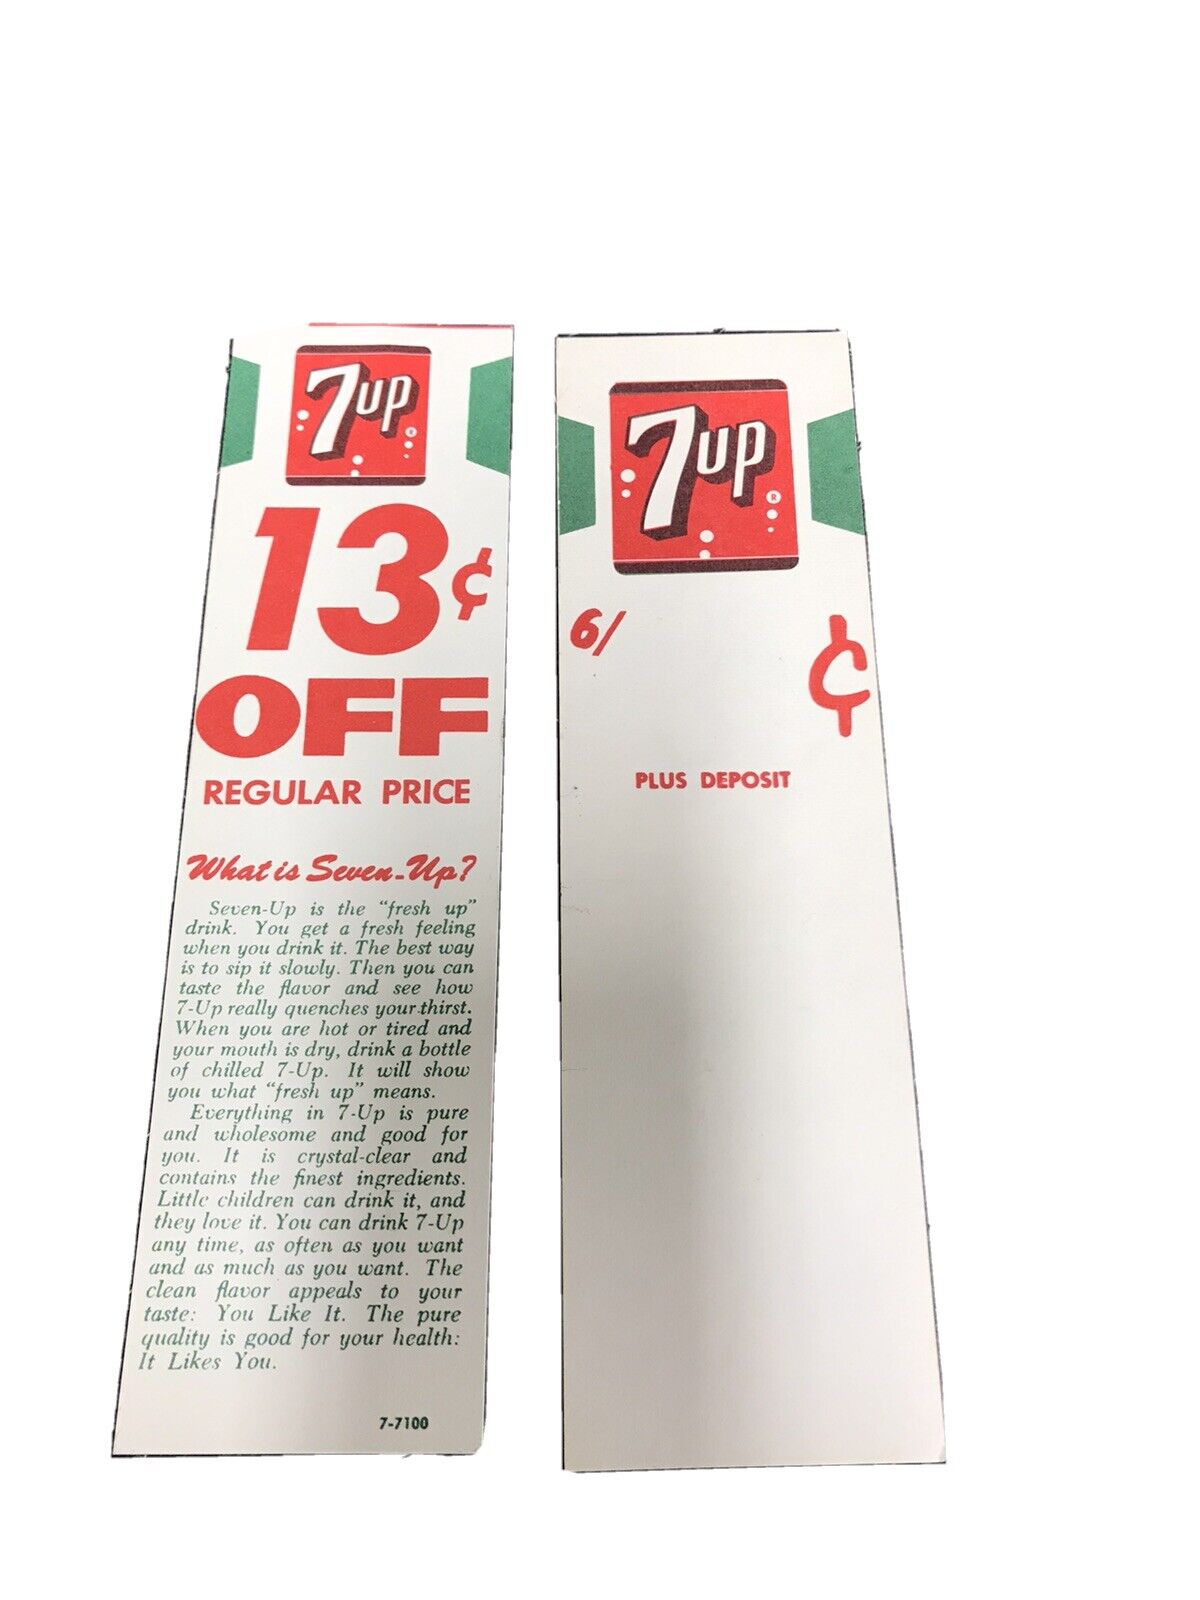 UNIQUE  Lot Of 2 Unused 7up BOTTLE CARTON STUFFER  RARE  1950s EARLY 1960s